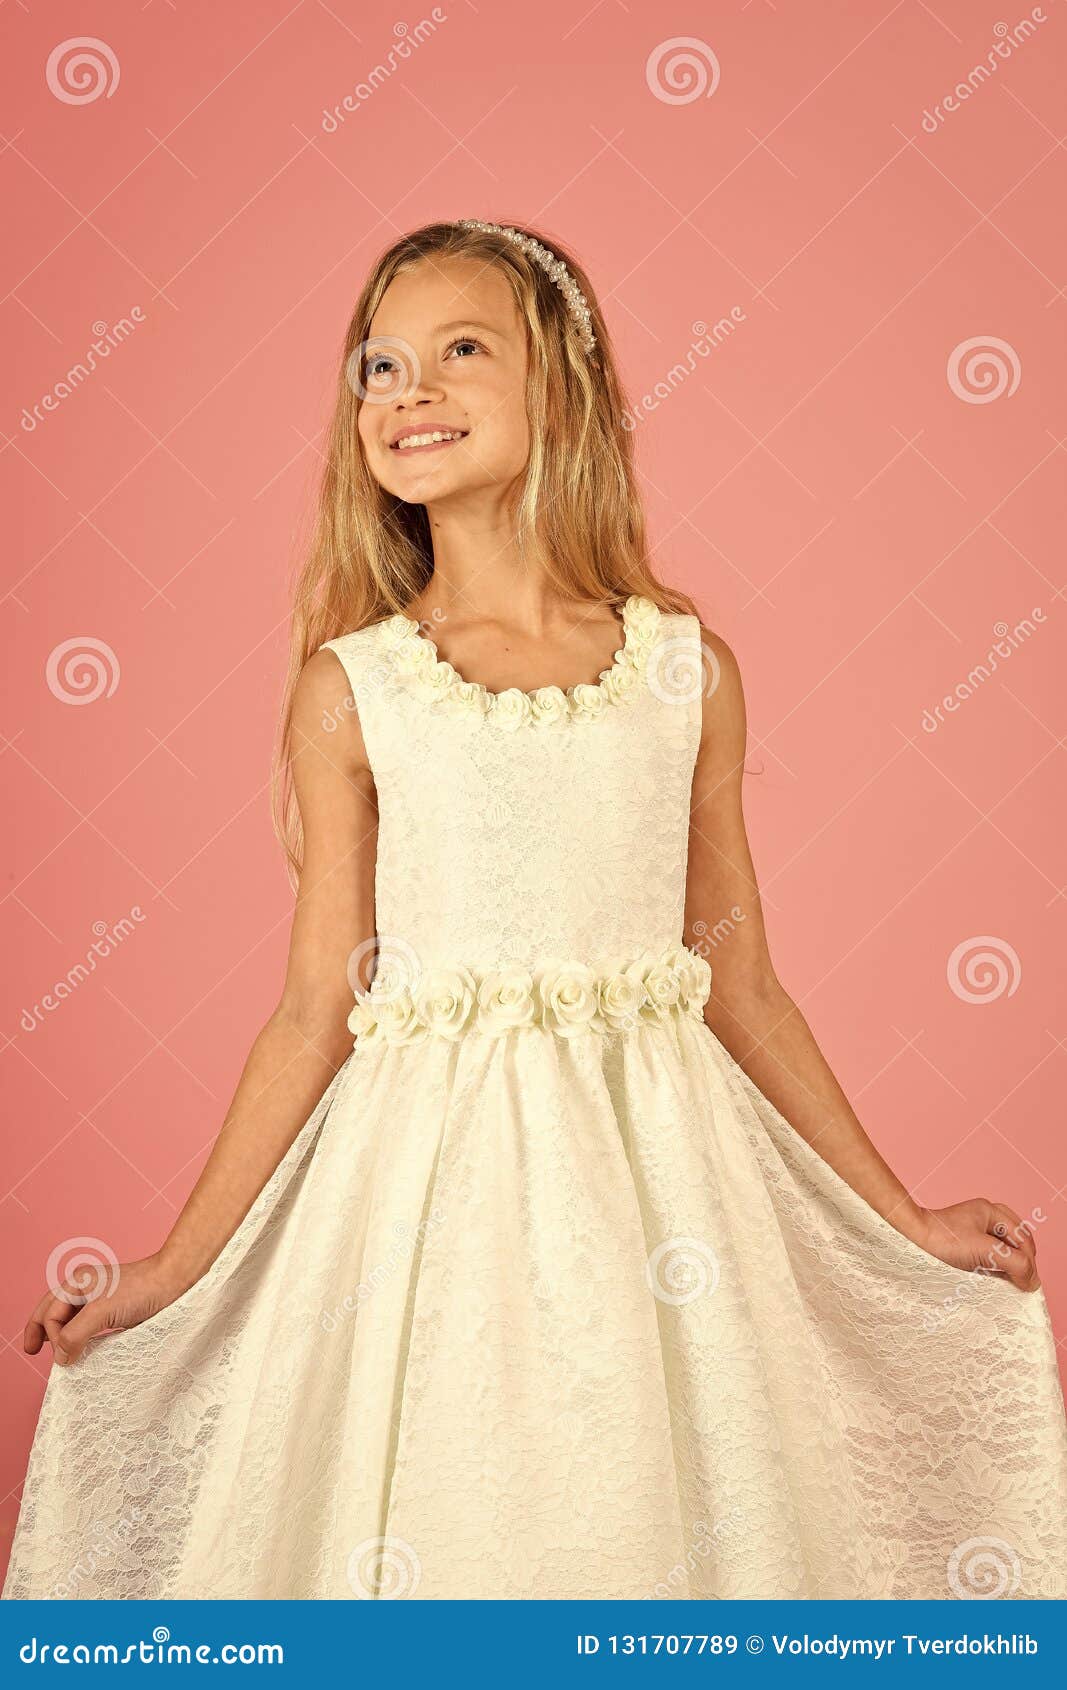 Cute Little Baby Girl Fashion Pretty Model Blonde Curly Lady Hair Funny  Child Birthday Party Fun Children Room Style Stock Image - Image of funny,  people: 131707789